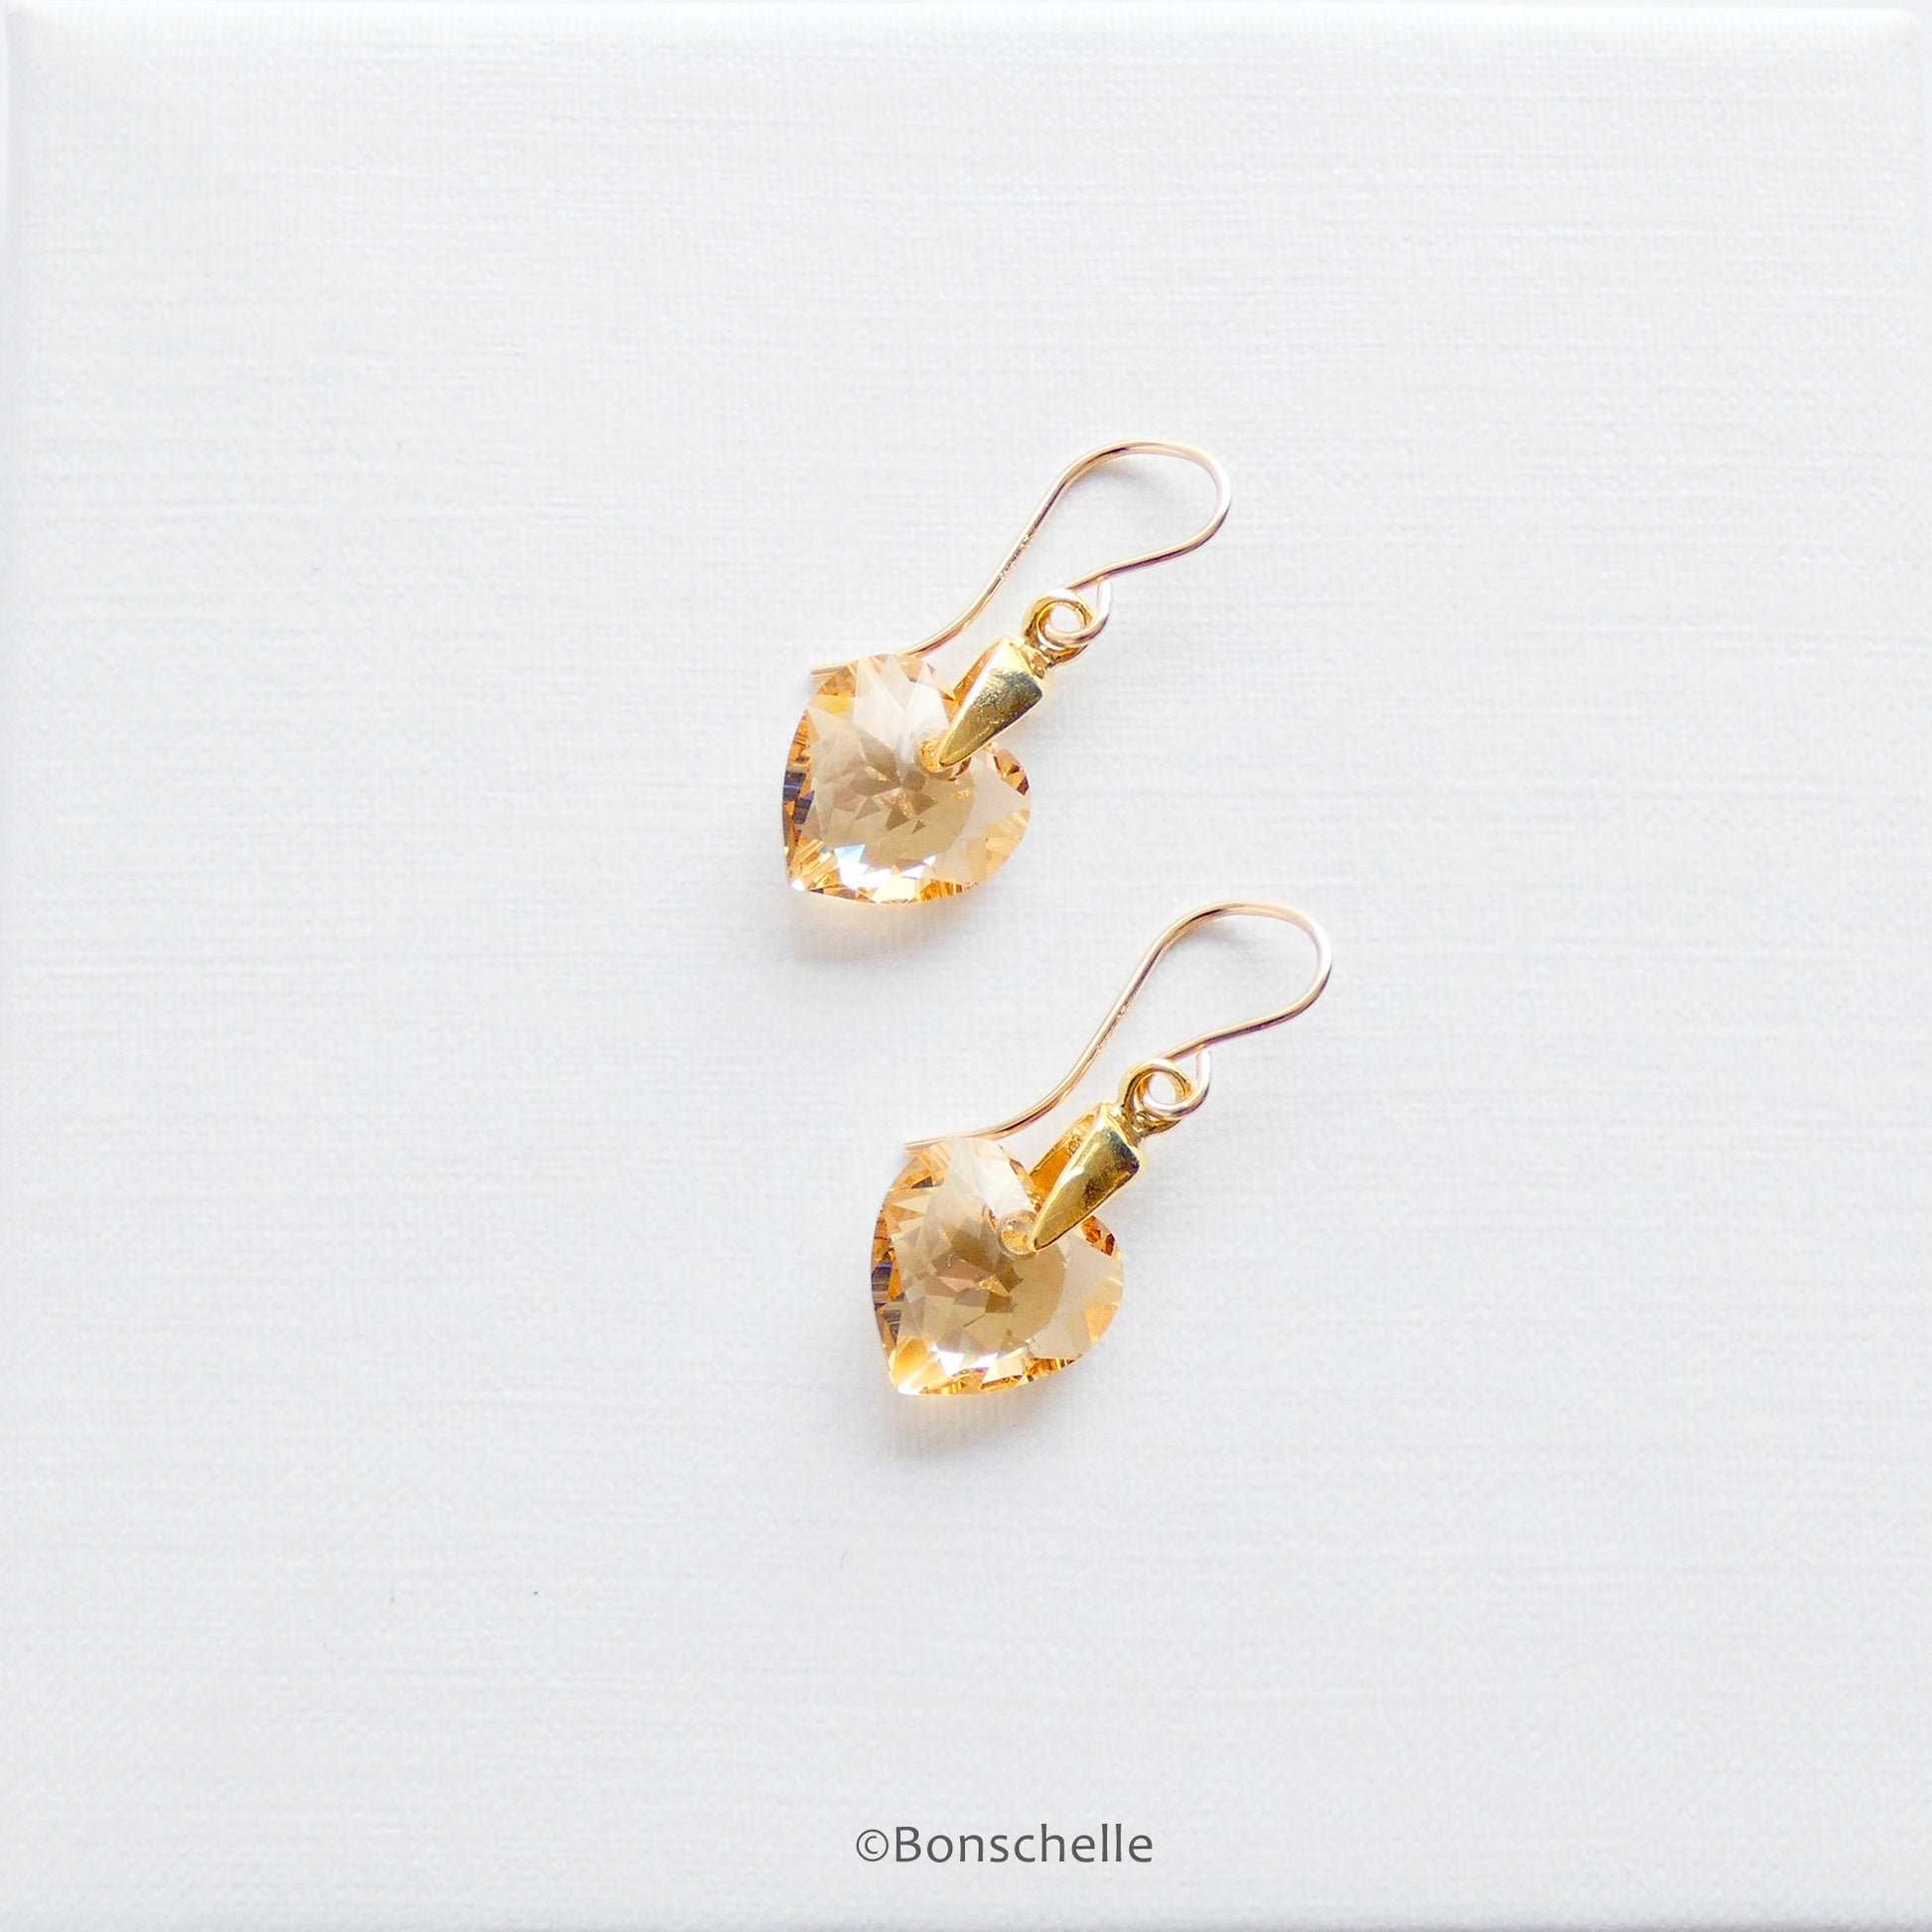 Handmade earrings with pale golden bronze toned Swarovski crystal heart earrings and 14K gold filled earwires laying on a surface